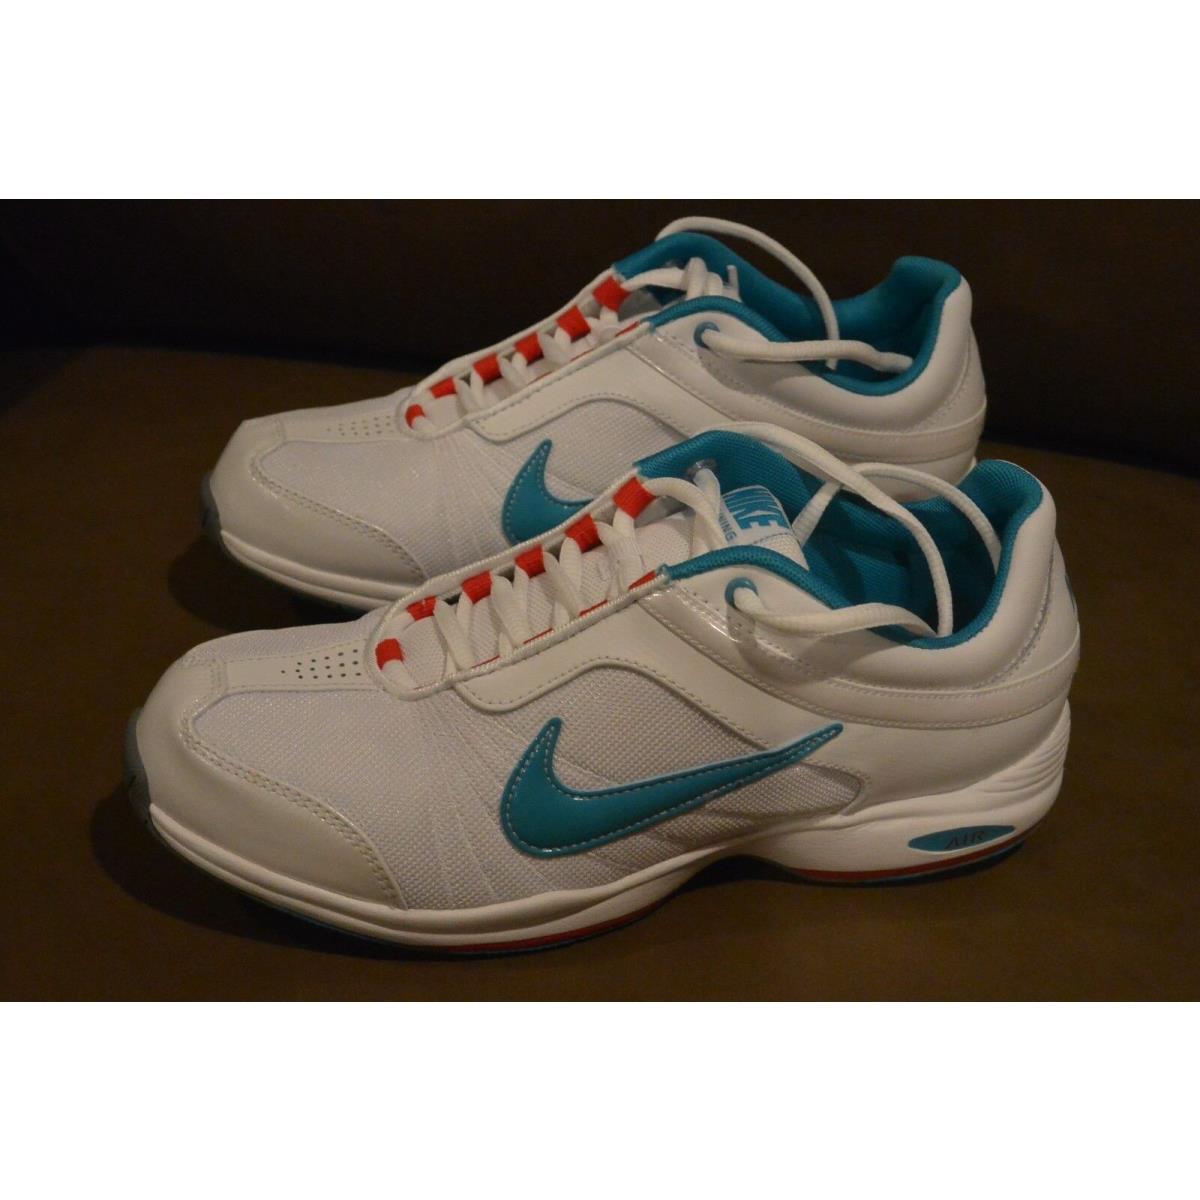 Nike shoes  - White, Blue, Red, Grey 0